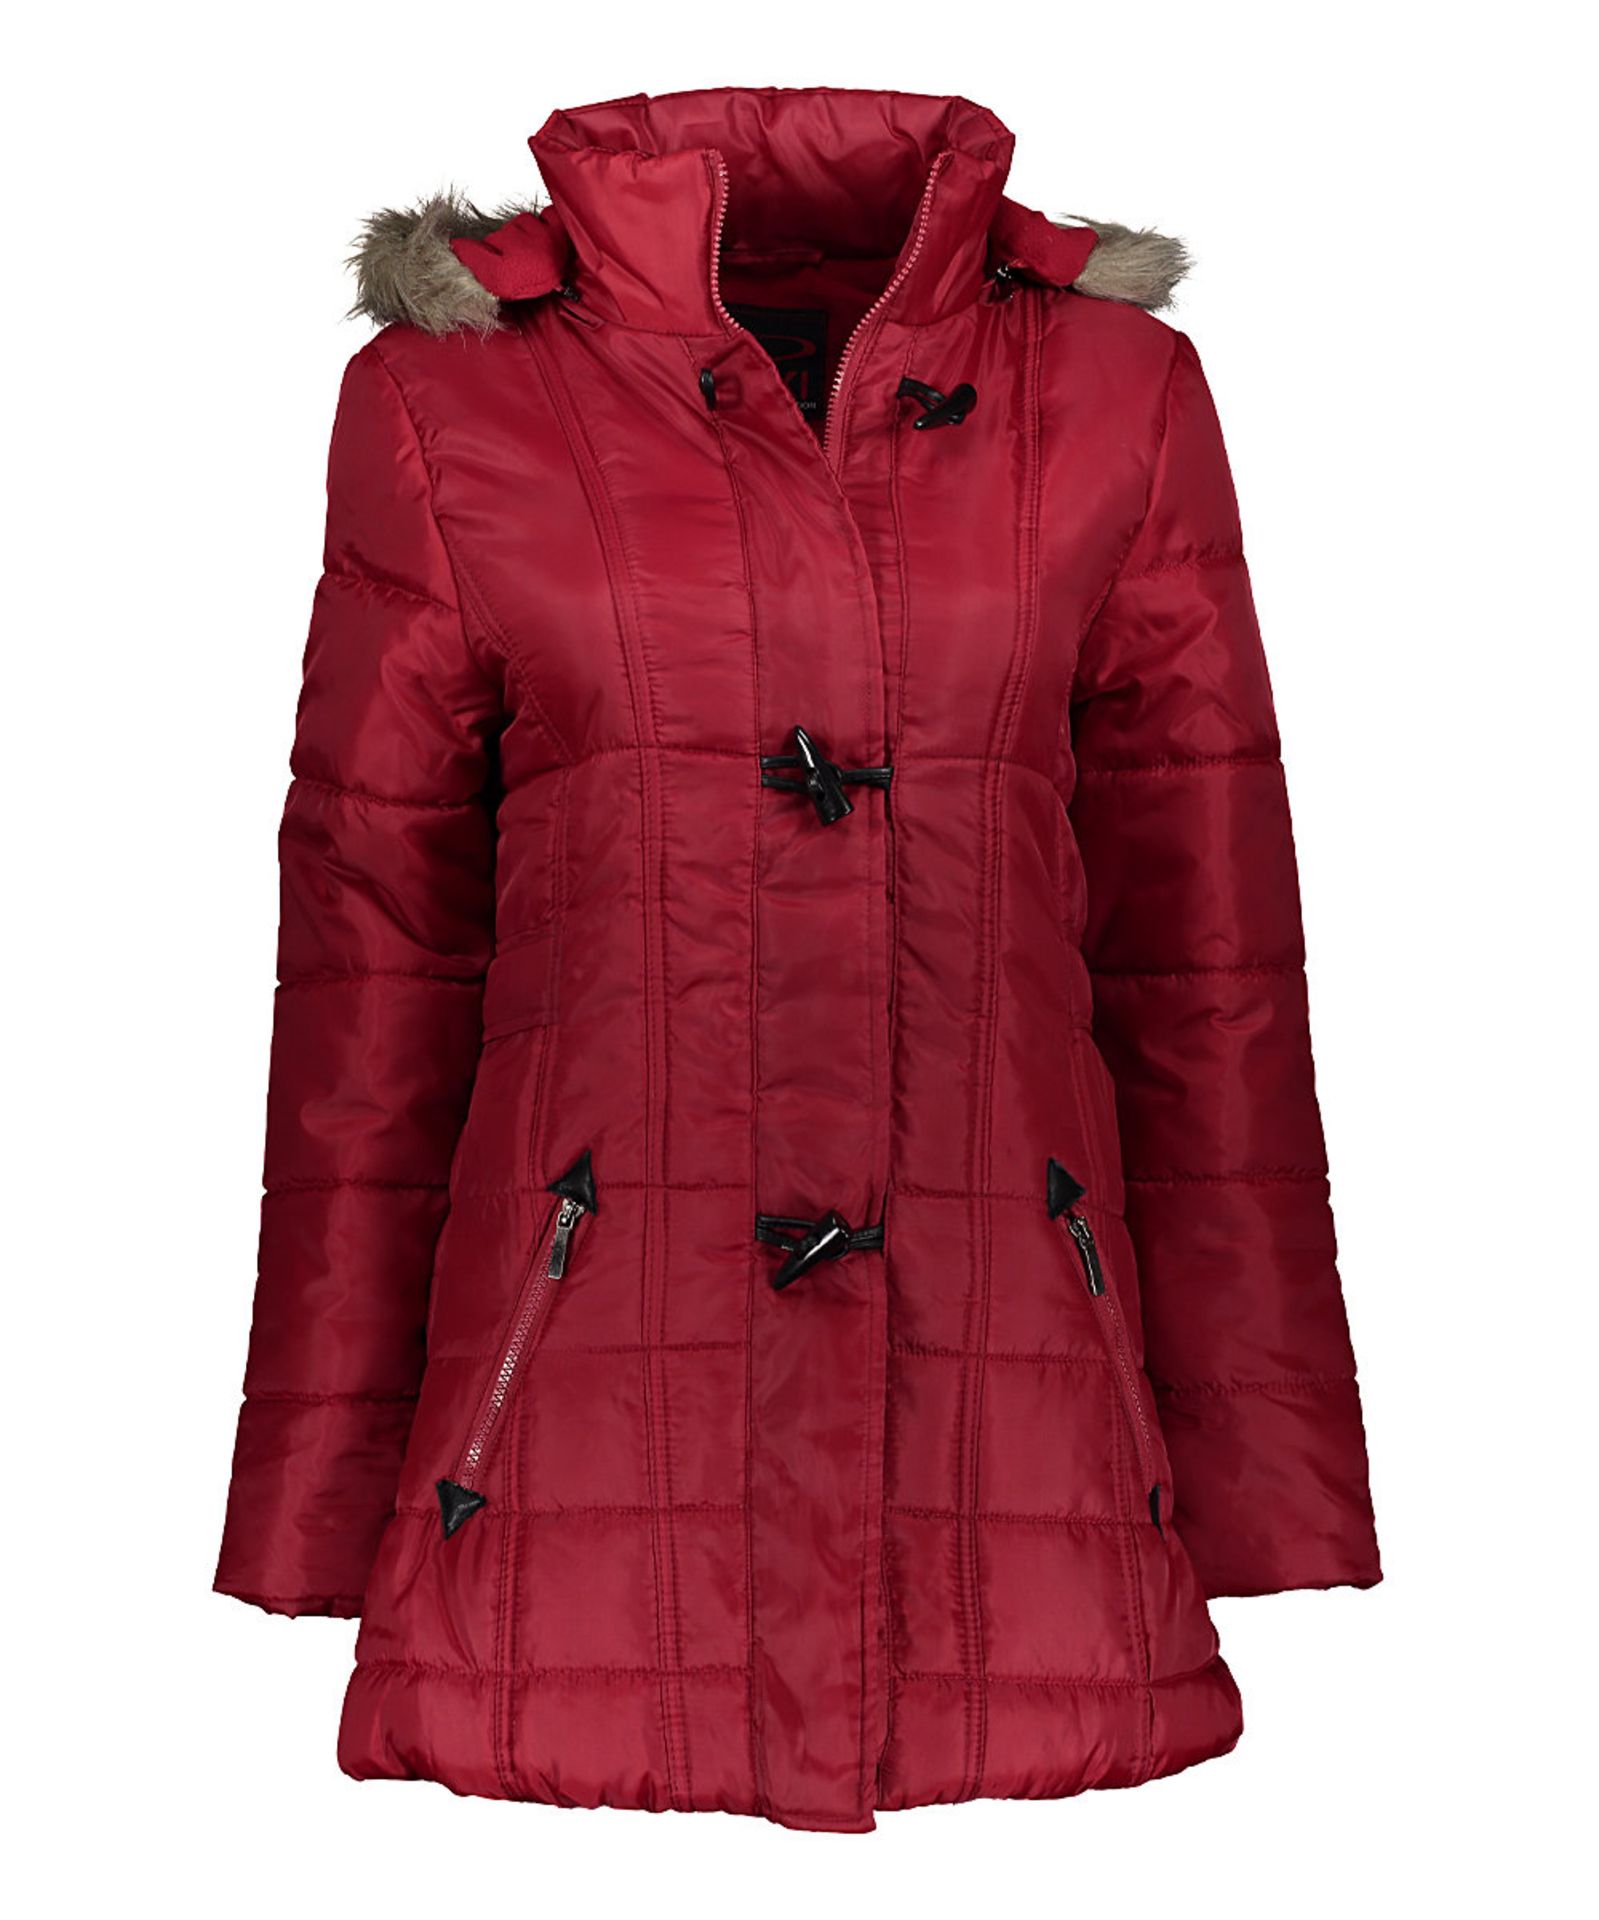 Red Toggle Puffer Coat (Us Size: S) [Ref: 39044319]